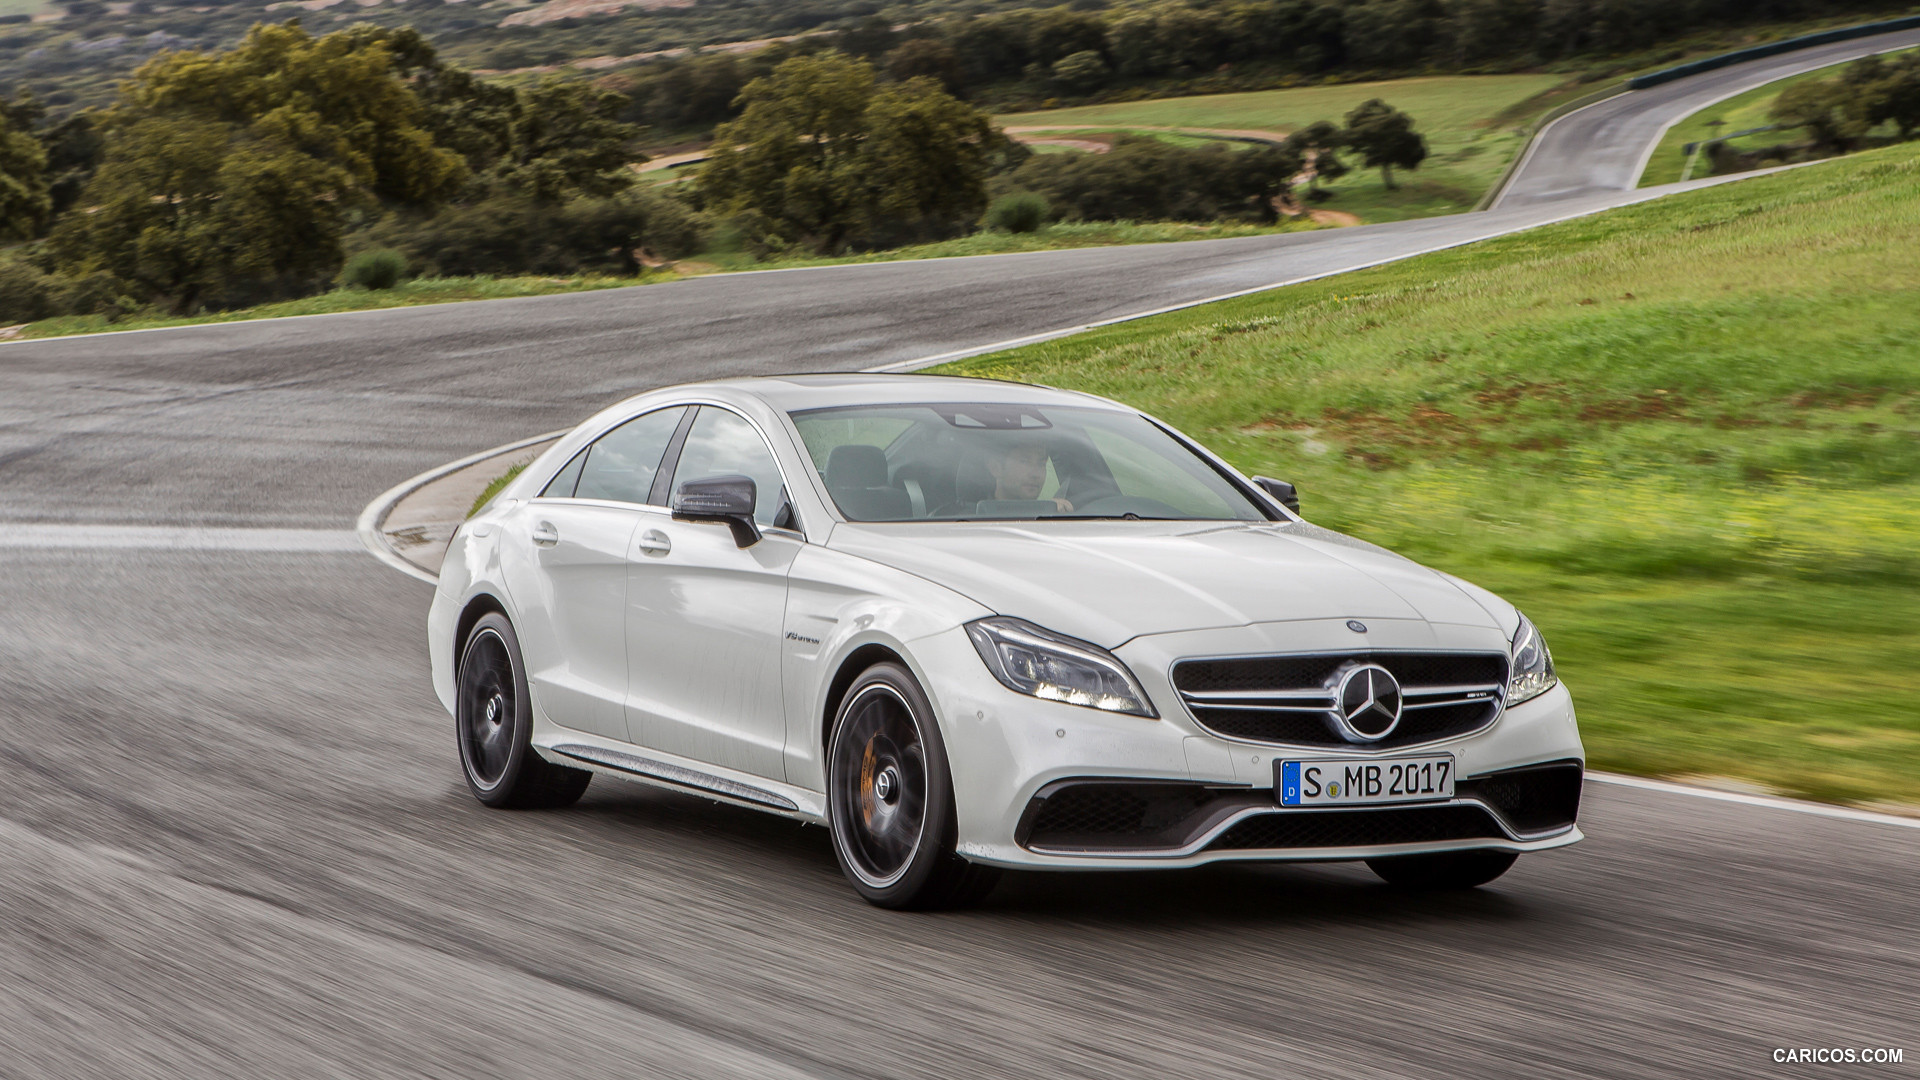 2015 Mercedes-Benz CLS 63 AMG S-Model - Front, #5 of 51